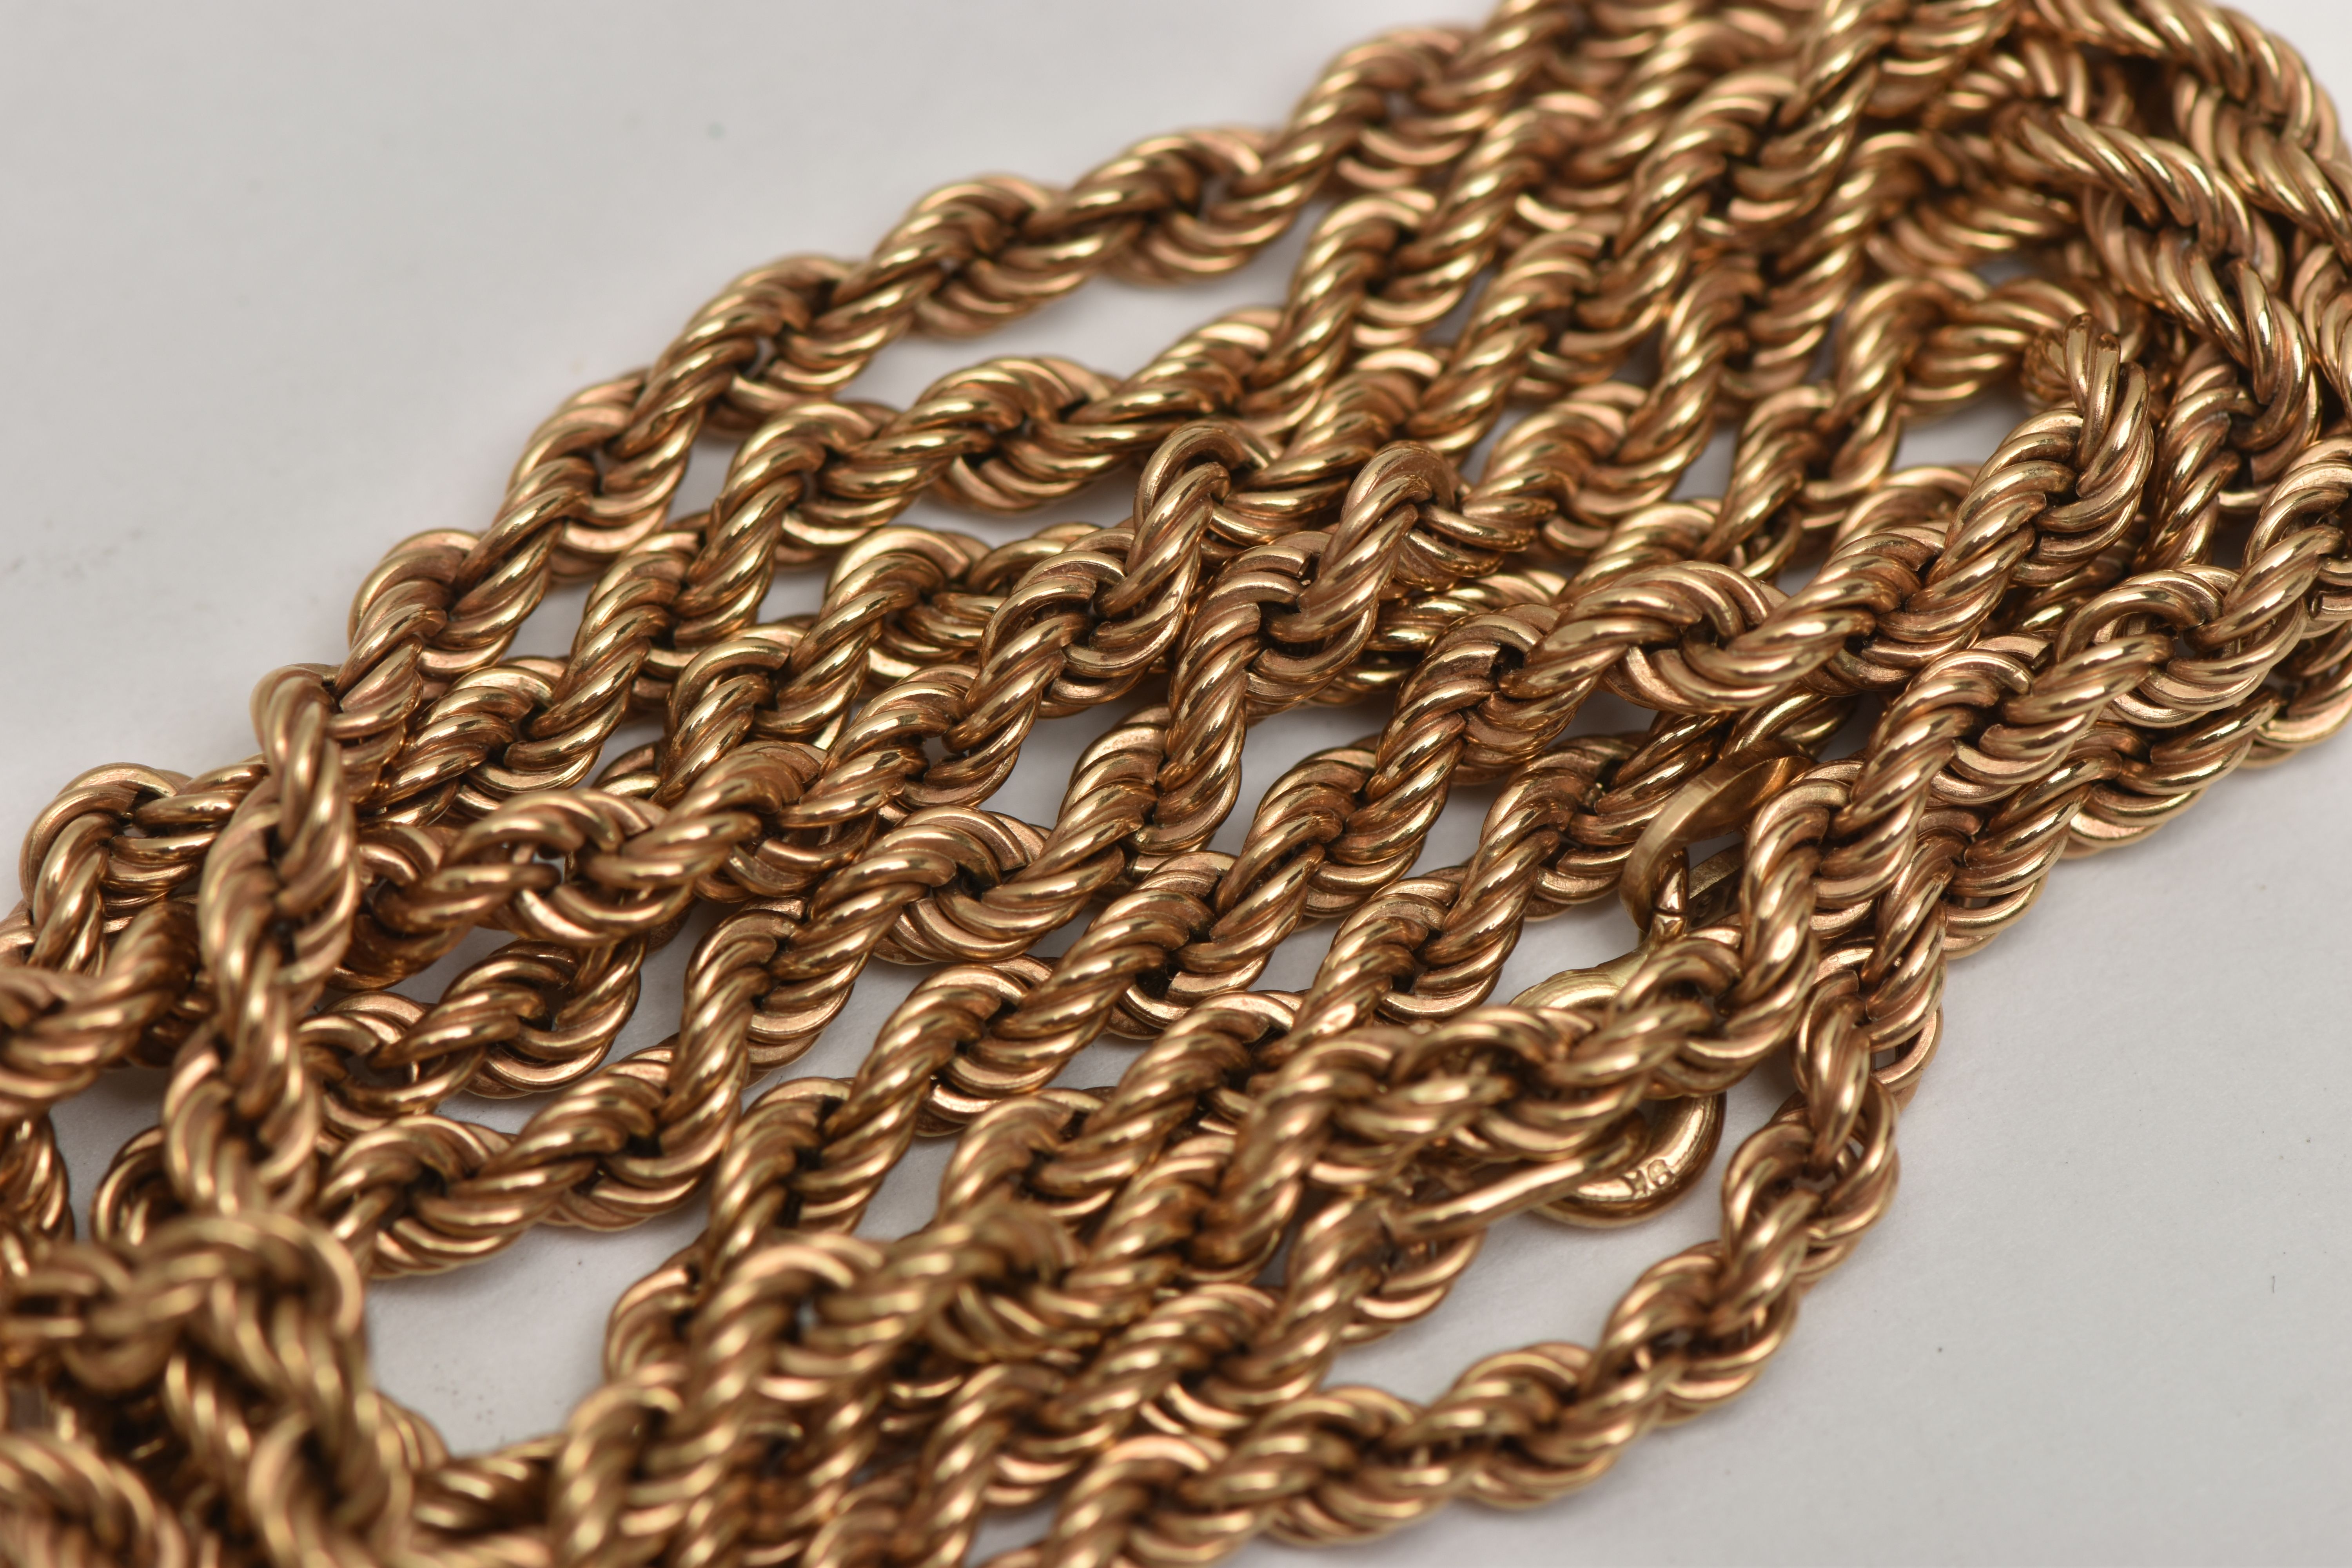 A 9CT GOLD ROPE TWIST CHAIN, fitted with a spring clasp, hallmarked 9ct London import, length 640mm, - Image 2 of 2